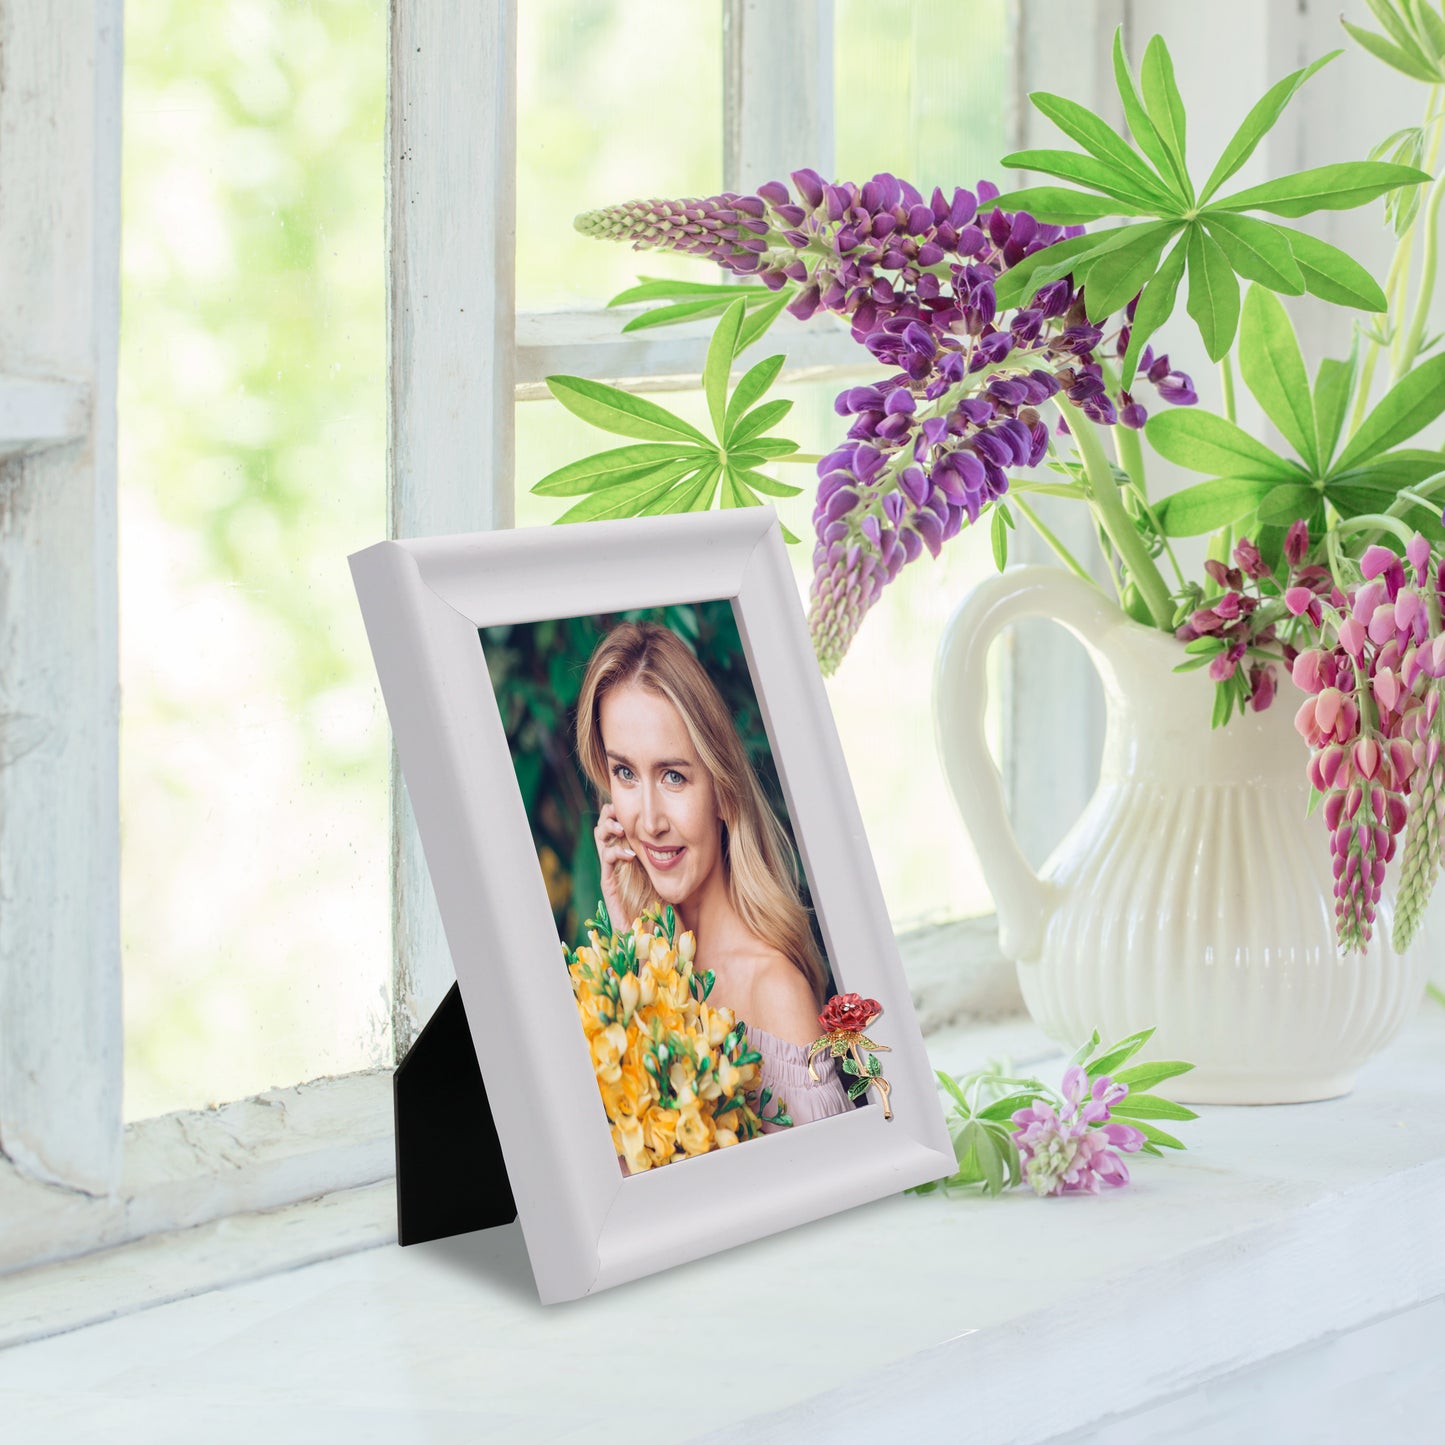 Dotride 5x7 Picture Frames with 3 Decorations, Wooden Photo Frame with Detachable 3 Flower Ornaments for Wall and Tabletop Display, Fit for Women Lovers Photos, White